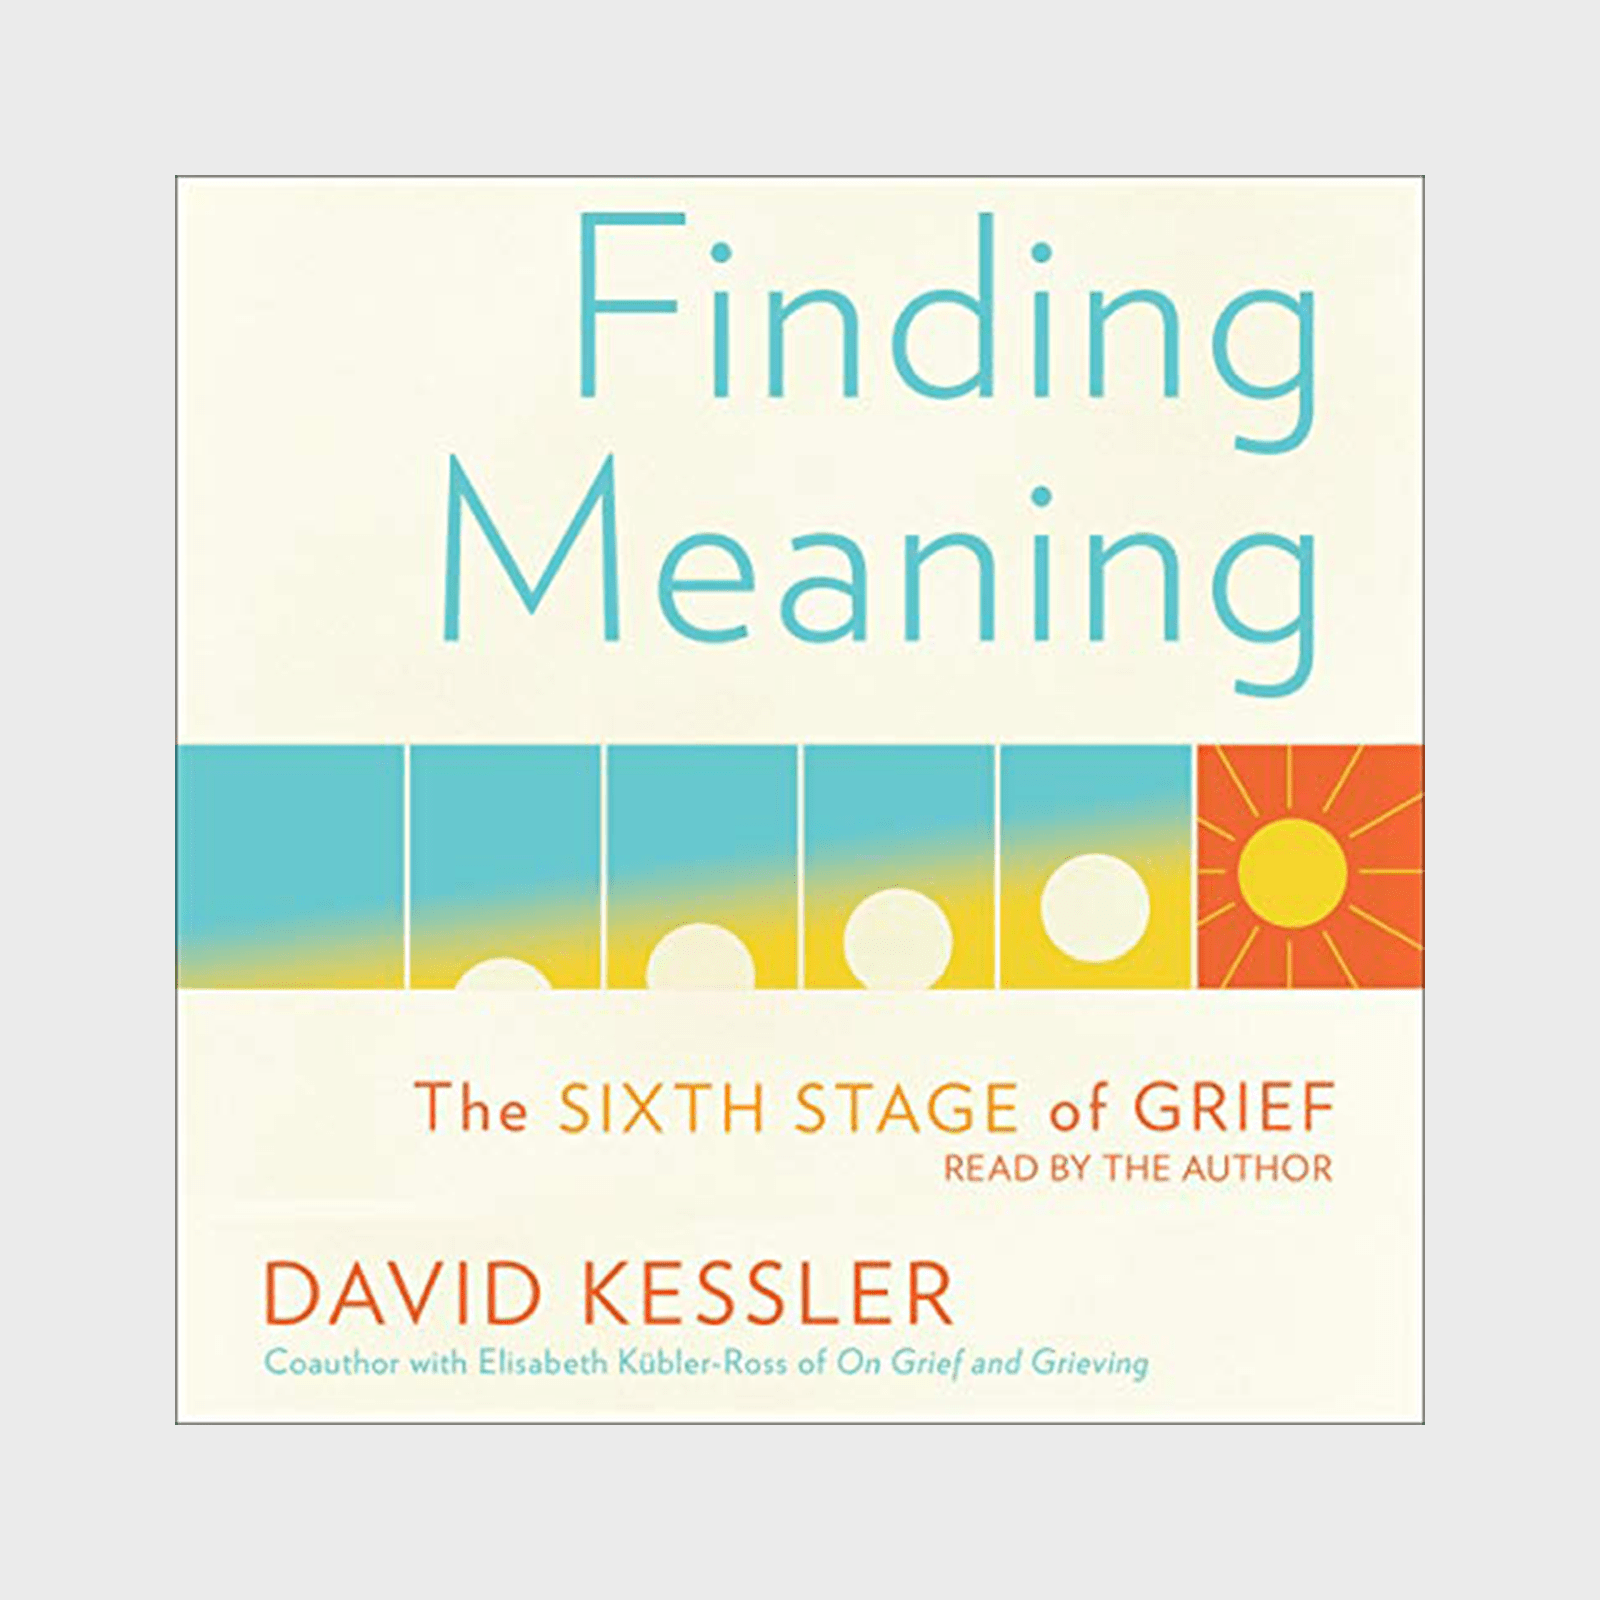 <h3><strong><em>Finding Meaning: The Sixth Stage of Grief</em> by David Kessler</strong></h3> <p>You may already be familiar with the five stages of grief: denial, anger, bargaining, acceptance, and depression. But did you know there's a sixth stage? Grief expert David Kessler narrates <em><a href="https://www.amazon.com/Finding-Meaning-David-Kessler-audiobook/dp/B07P88B6J6/" rel="noopener noreferrer">Finding Meaning</a></em>, which was inspired by the sudden death of his own son. He acknowledges that grief will never go away completely, but we can lessen the pain when we find meaning in our loss. Since no two losses are the same, this book is filled with a variety of stories, insights, and emotions that will help validate your own feelings and help you on your healing journey. It might be one of the <a href="https://www.rd.com/list/books-that-will-make-you-cry/" rel="noopener noreferrer">sad books</a> that make you cry—but that's part of getting through loss.</p> <p class="listicle-page__cta-button-shop"><a class="shop-btn" href="https://www.amazon.com/Finding-Meaning-David-Kessler-audiobook/dp/B07P88B6J6/">Shop Now</a></p>